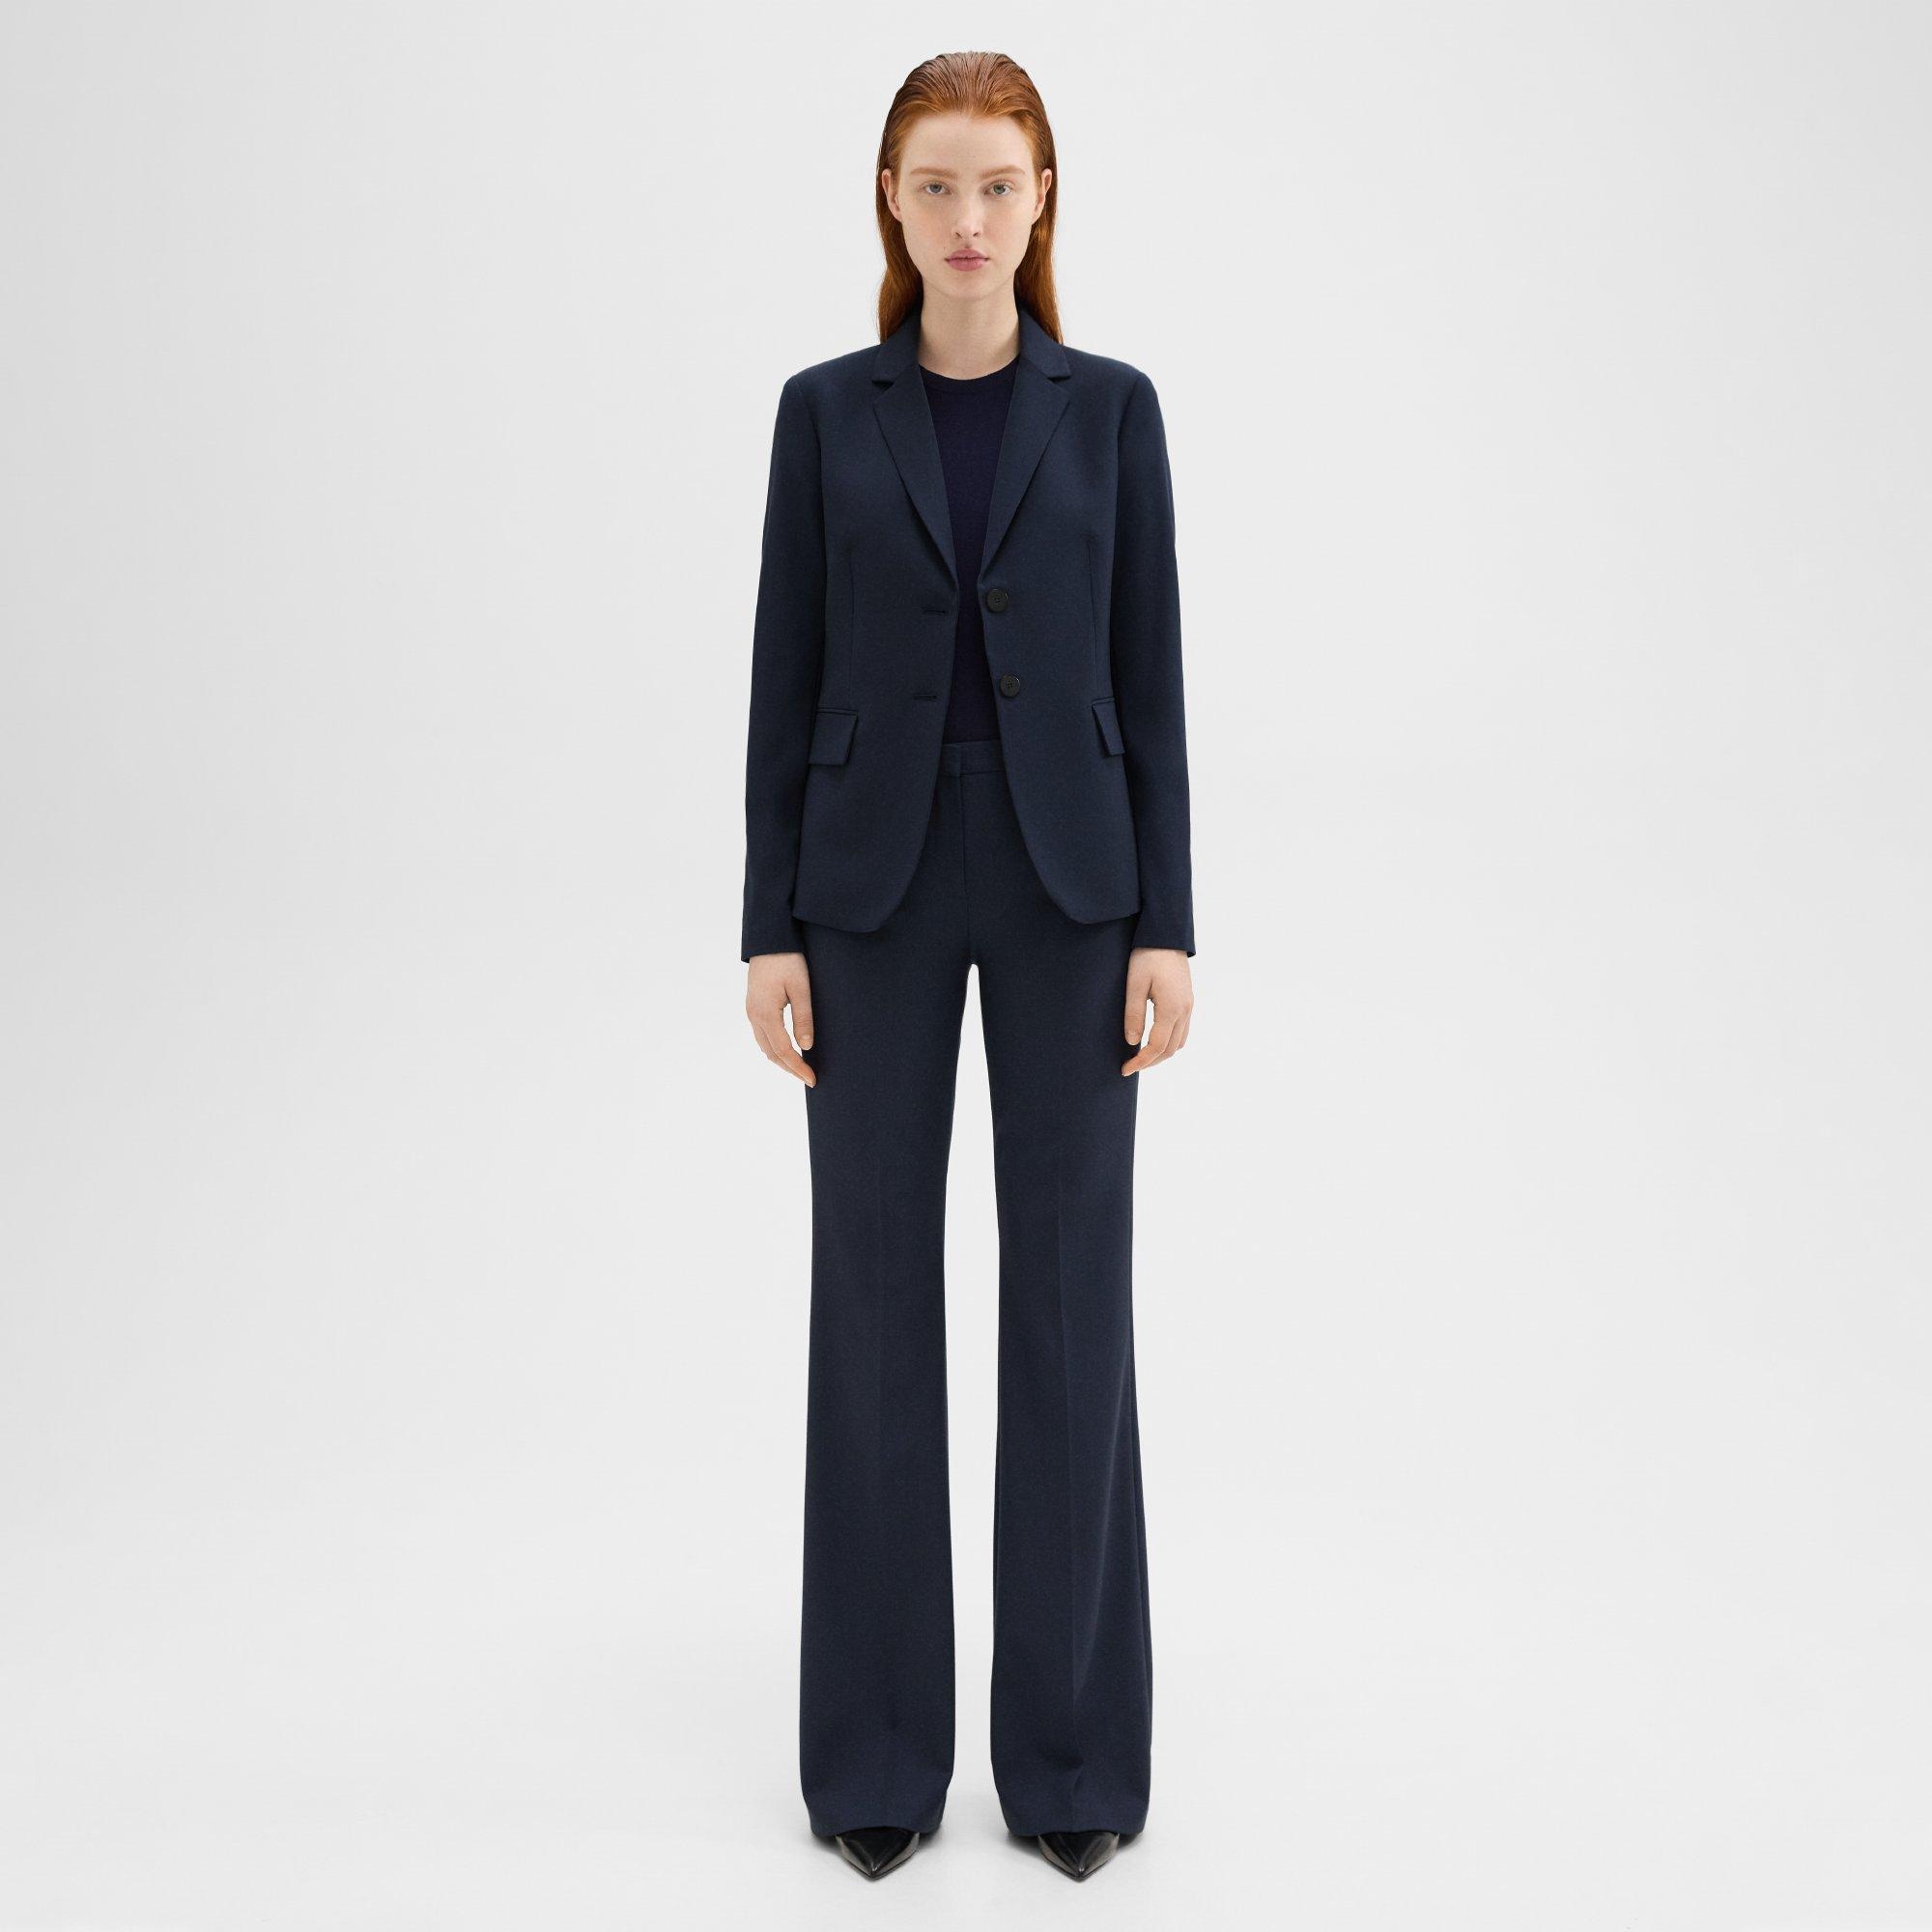 Theory Demitria 2 Stretch Good Wool Suit Pants